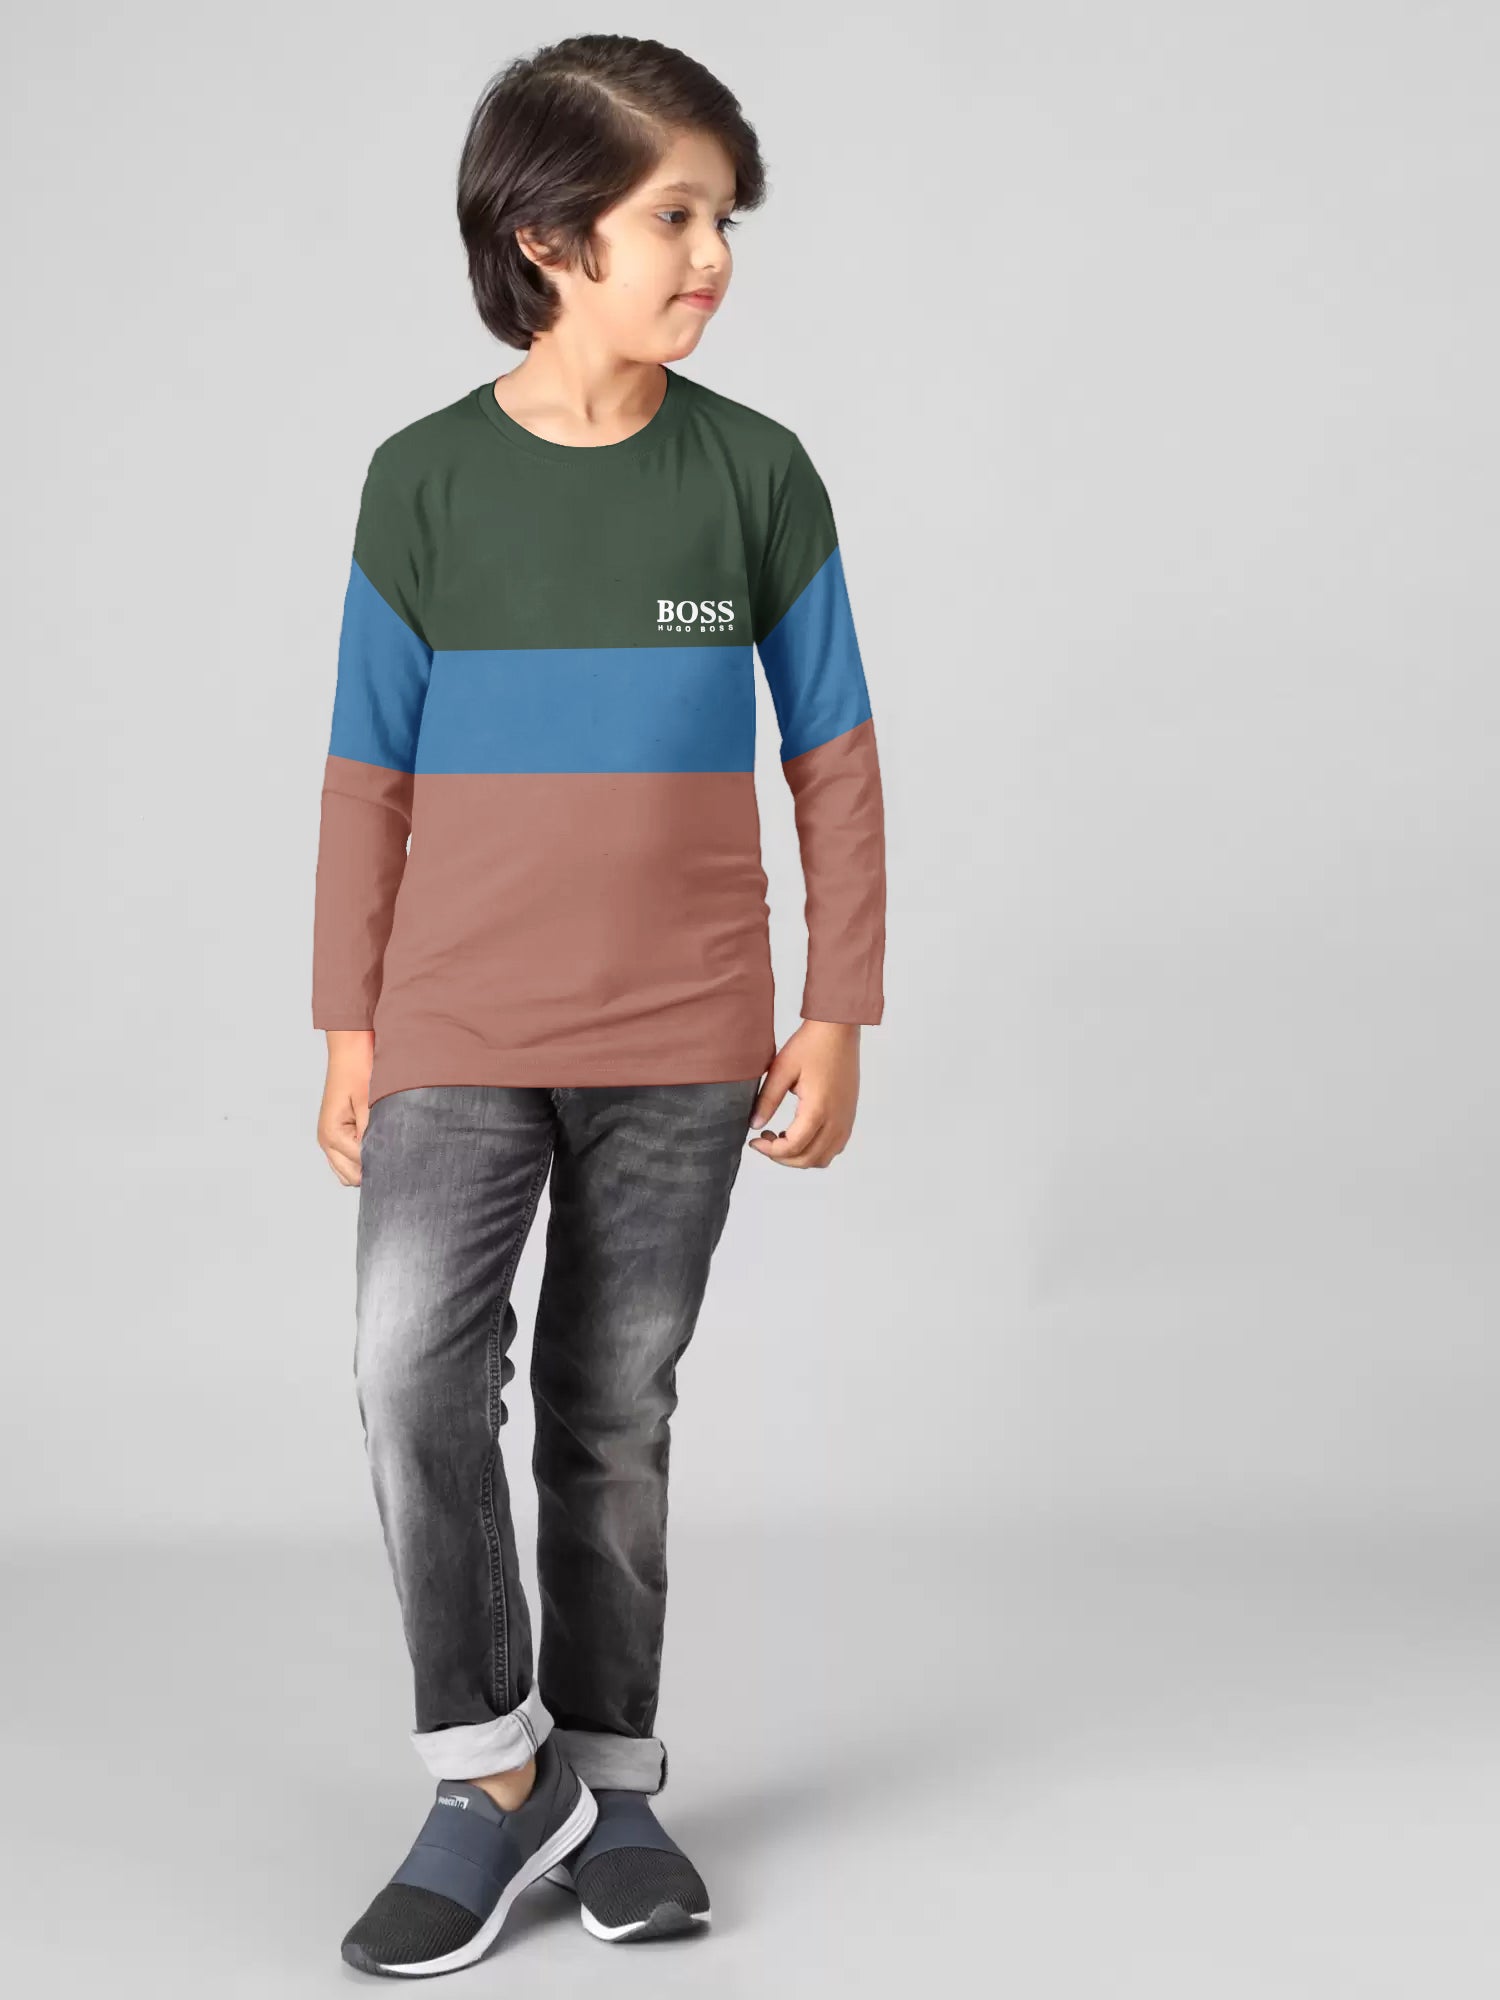 Crew Neck Long Sleeve Single Jersey Tee Shirt For Kids-Olive Green With Panels-AZ143